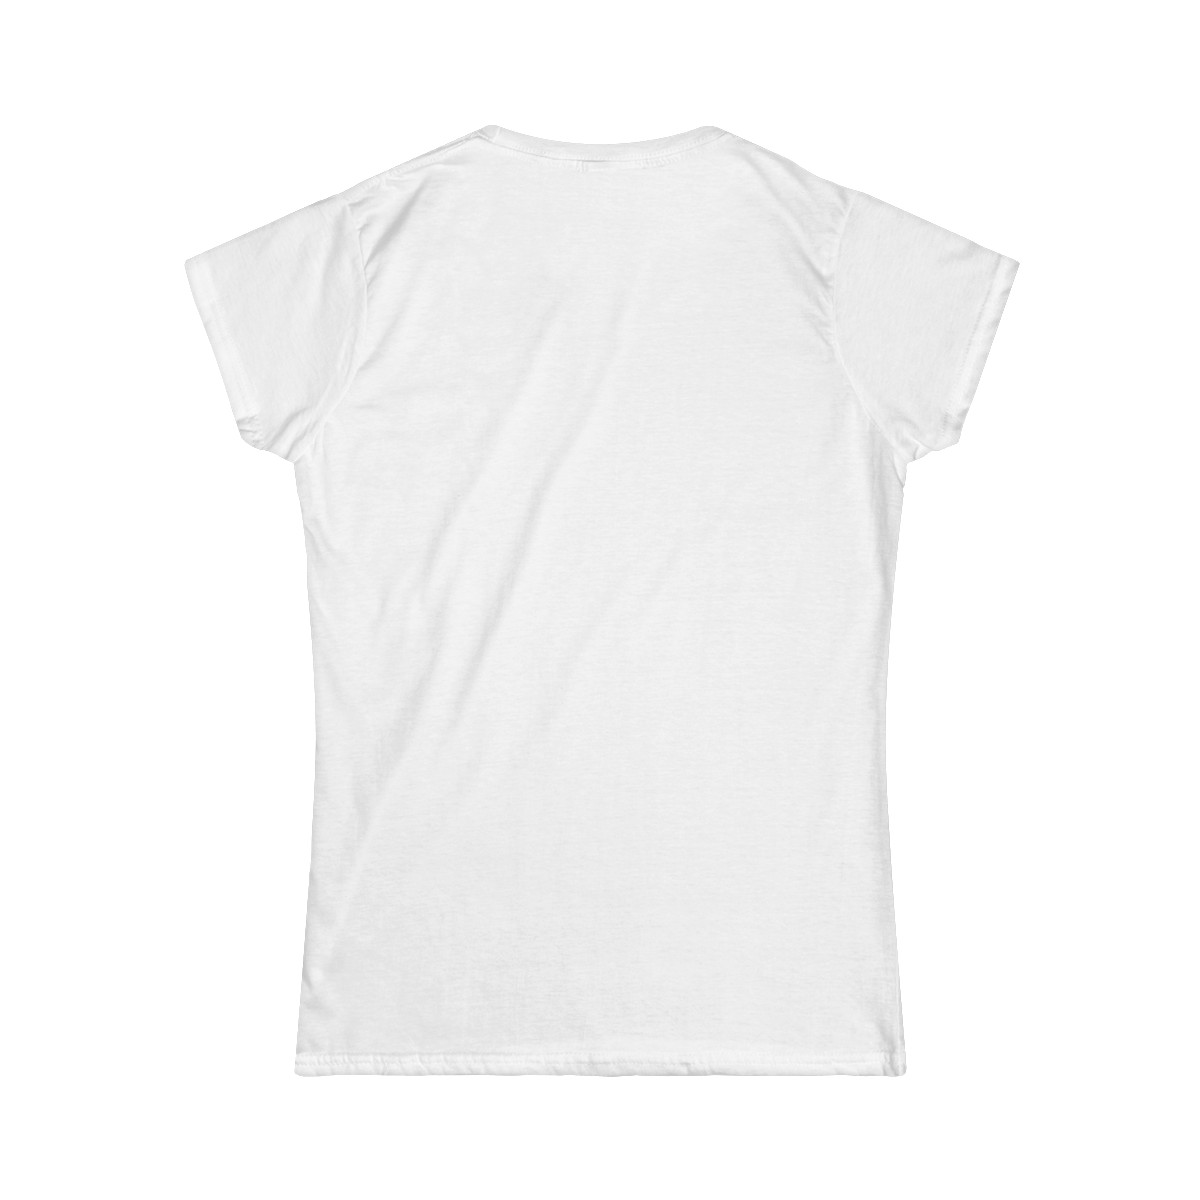 Paul Bodhidharma - Women's Softstyle Tee: Color Image product thumbnail image